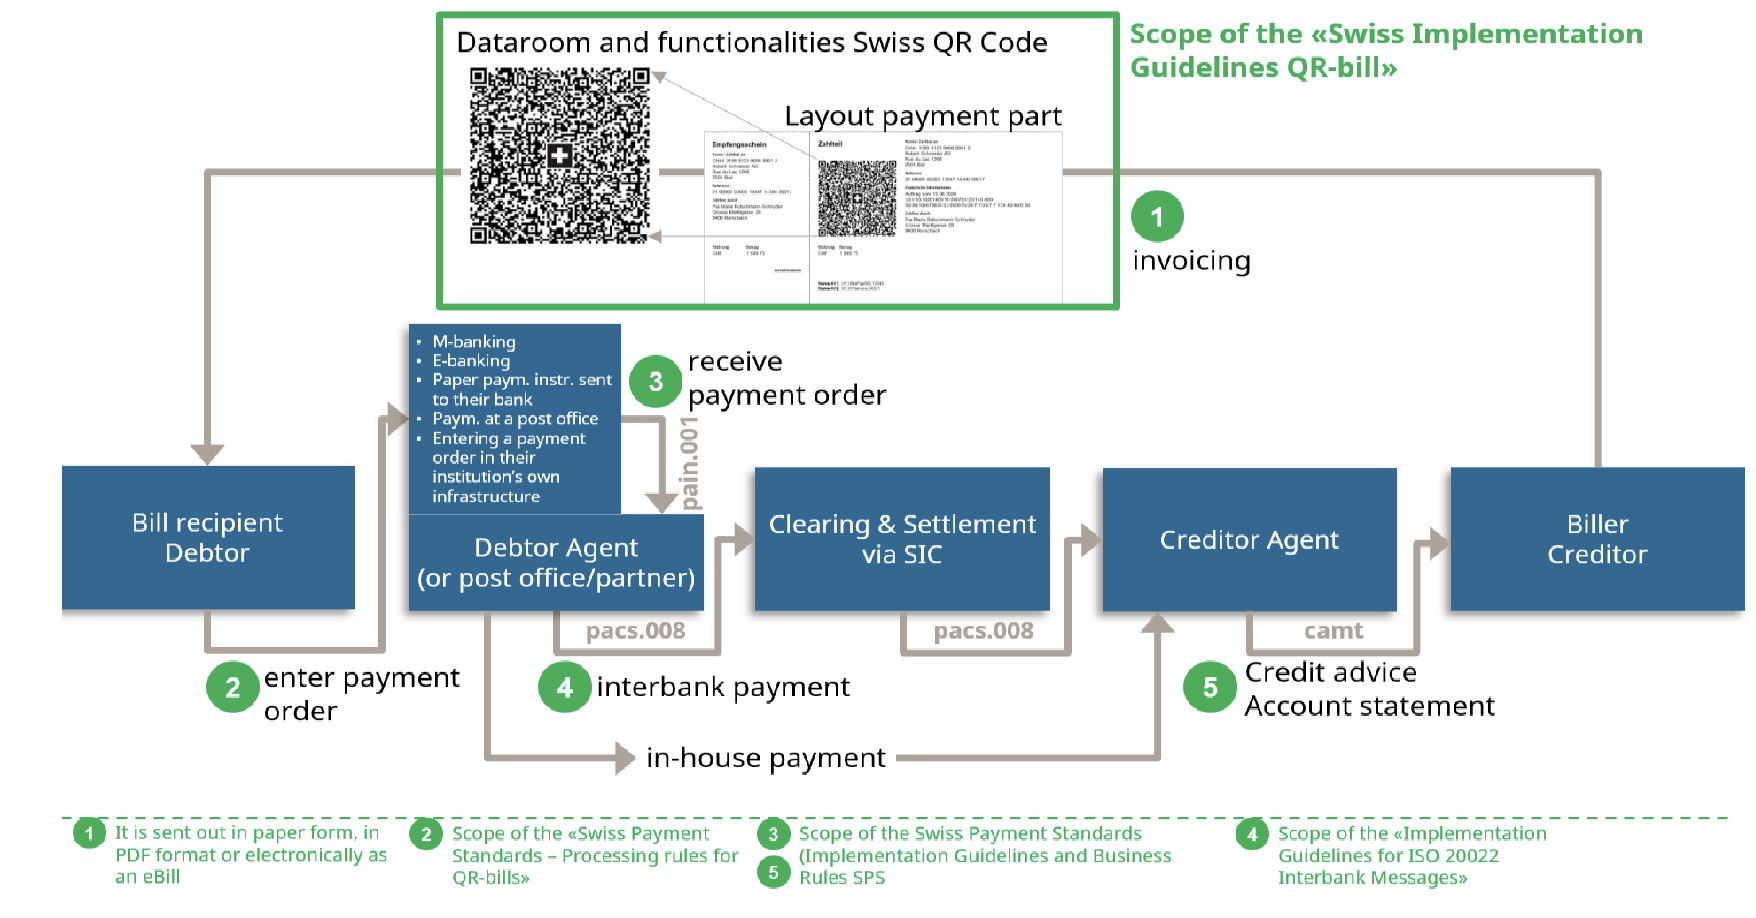 Basic process of Swiss payments flow